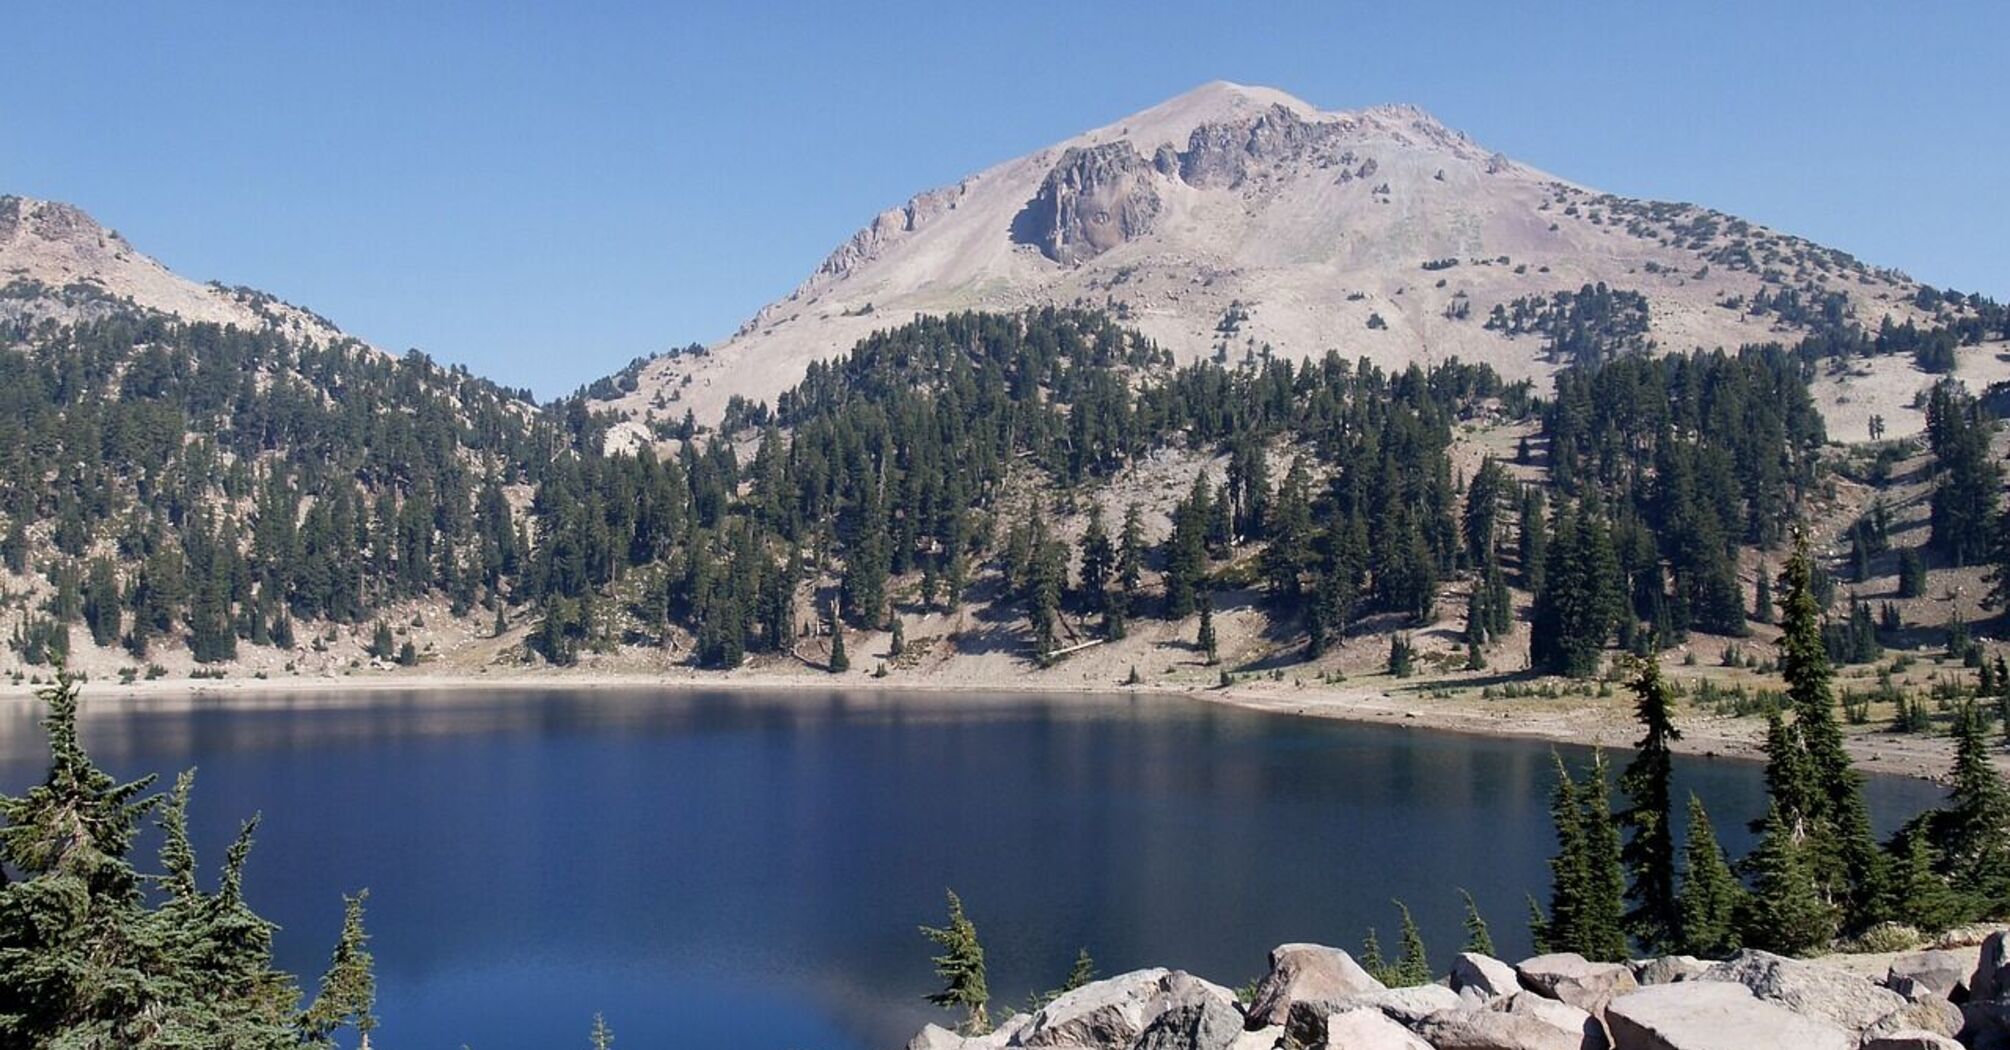 Lassen Volcanic National Park: why it is called an alternative to Yellowstone